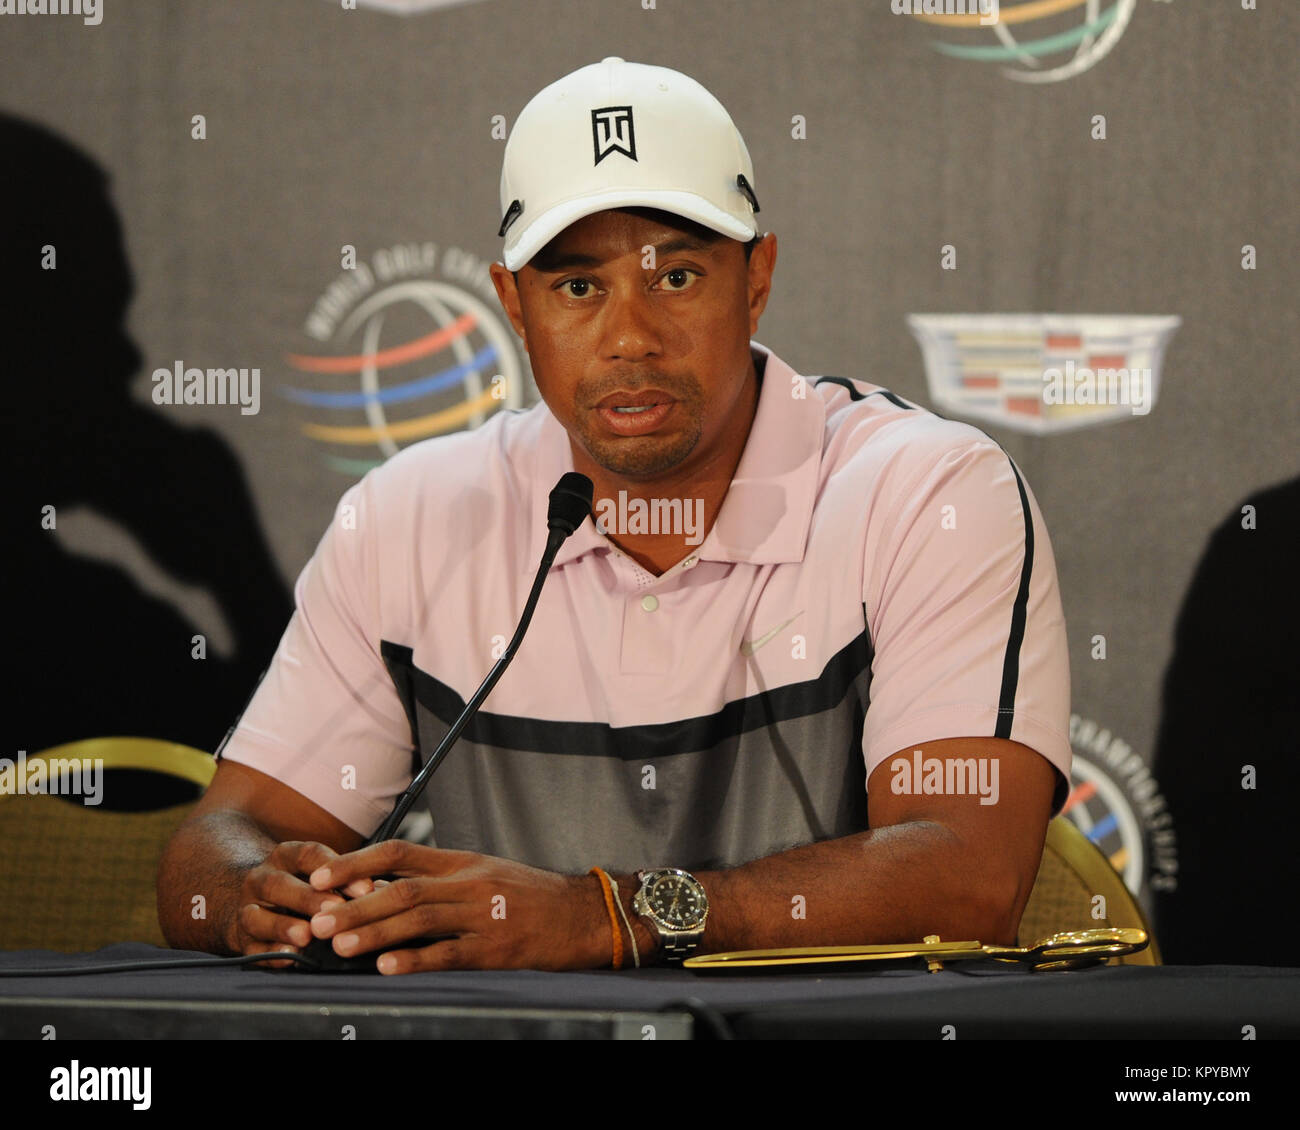 DORAL, FL - MARCH 05: Tiger Woods participates in the pratice round of the World Golf Championships-Cadillac Championship at Trump National Doral on March 5, 2014 in Doral, Florida  People:  Tiger Woods Stock Photo